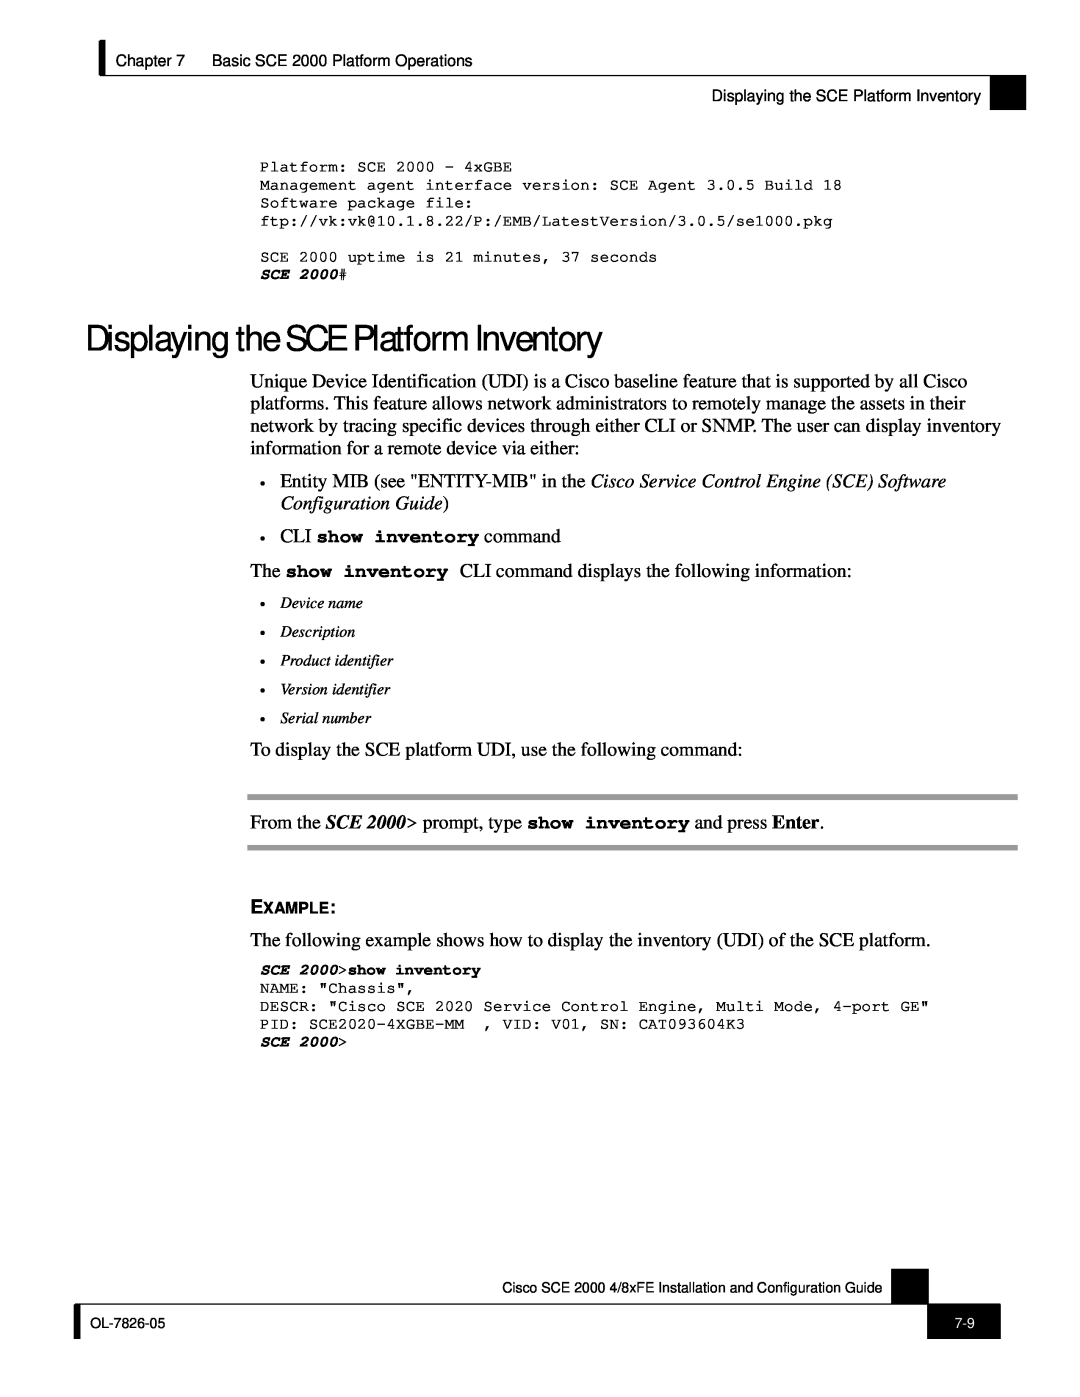 Cisco Systems SCE 2000 4/8xFE manual Displaying the SCE Platform Inventory, CLI show inventory command 